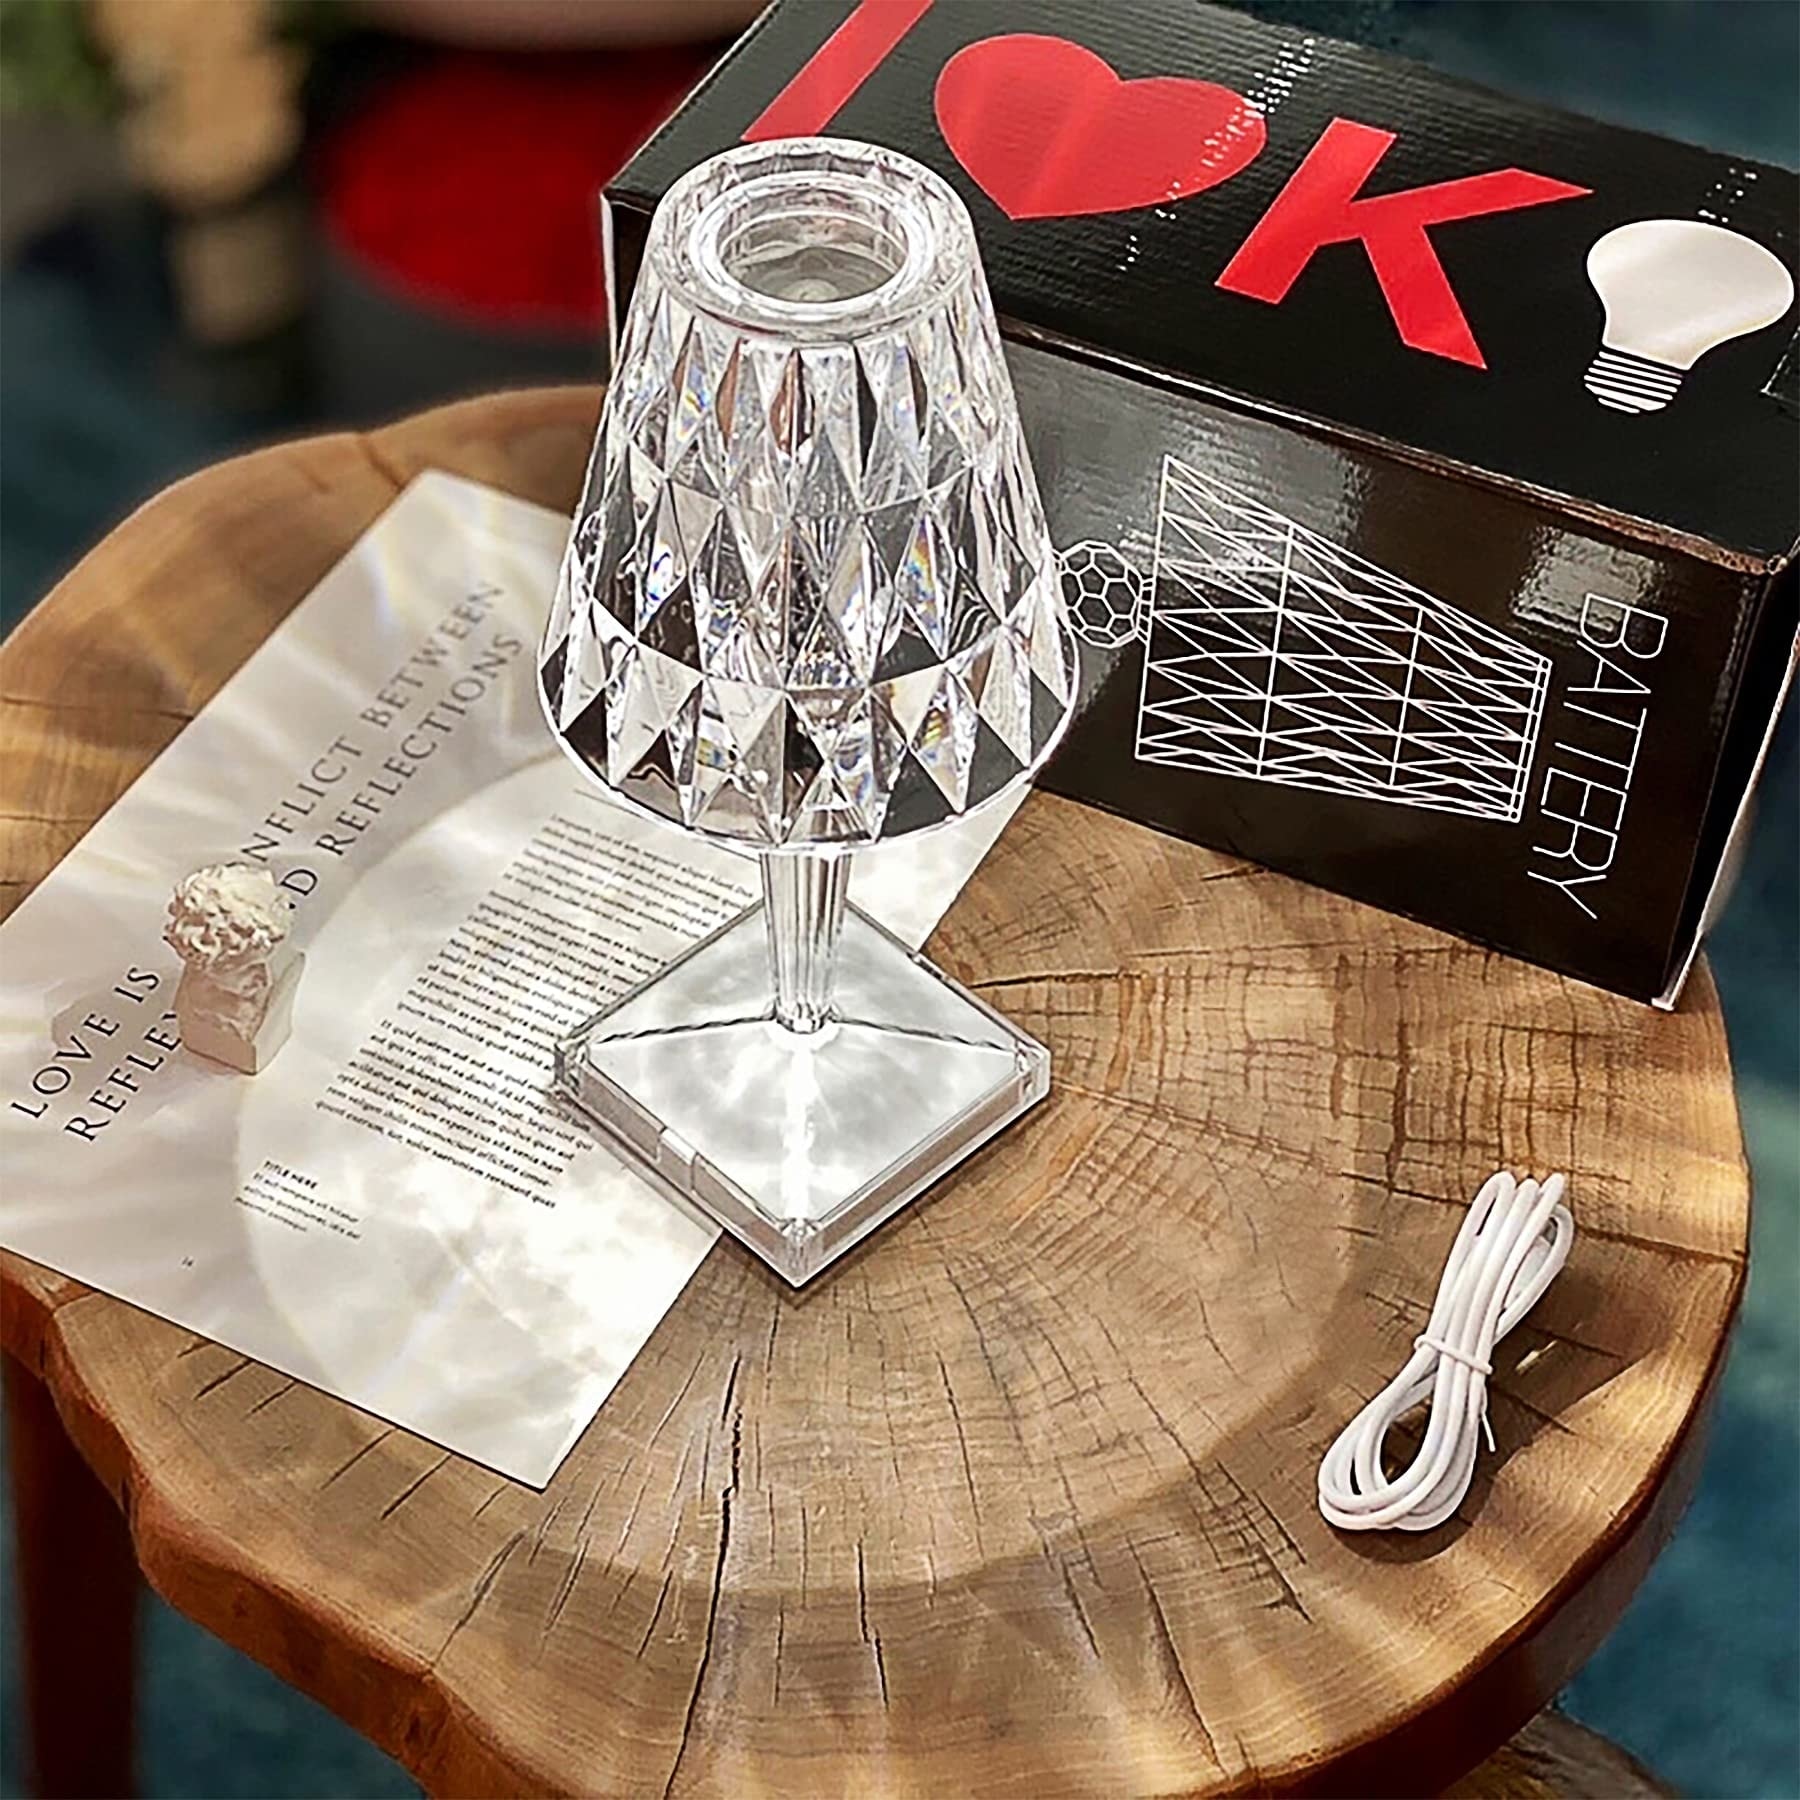 https://ak1.ostkcdn.com/images/products/is/images/direct/cb2d877ffd303d6afb0bba238f1e83095deec807/Crystal-Table-Lamp-3-Way-Dimmable-Color-Touch-Control-USB-Rechargeable-Cordless-Acrylic-Diamond-Nightstand-Light.jpg